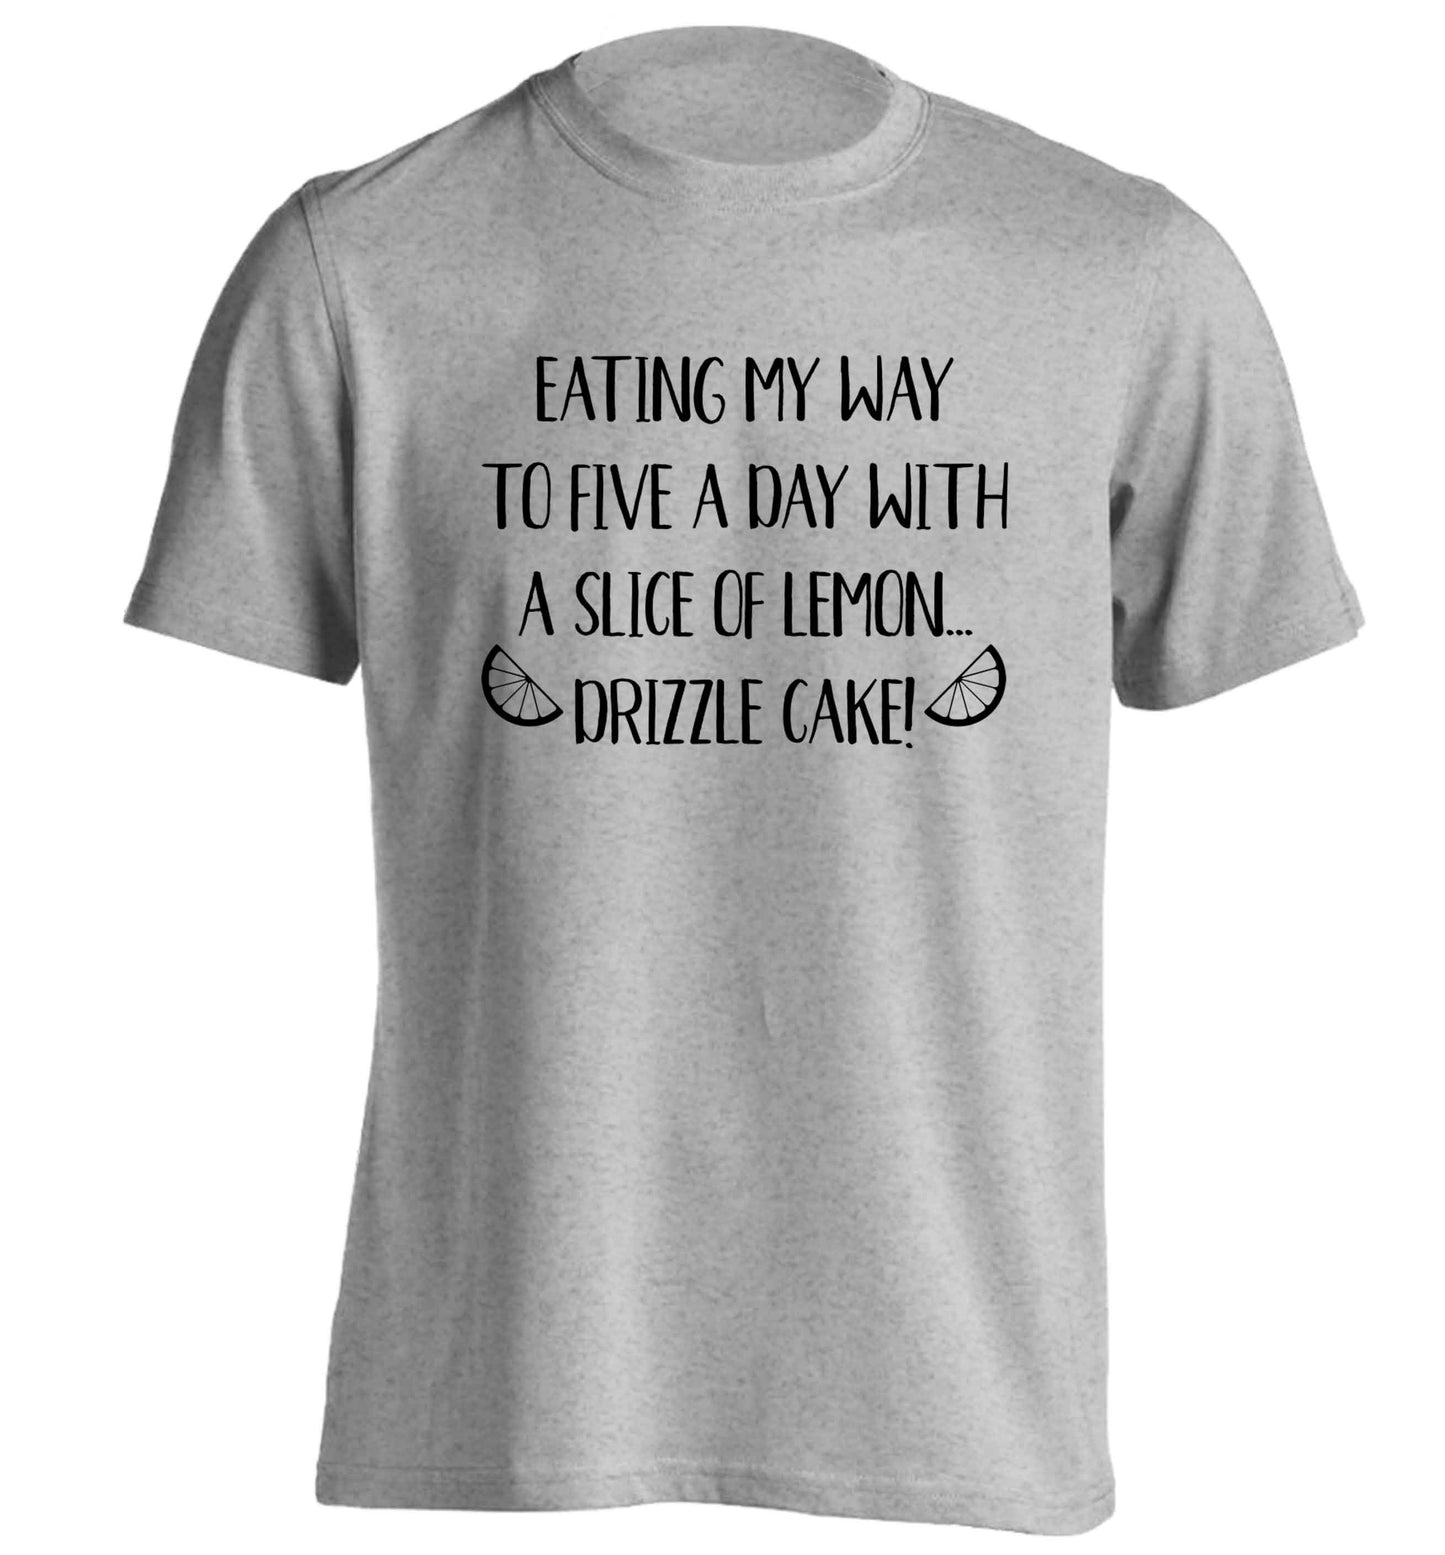 Eating my way to five a day with a slice of lemon drizzle cake day adults unisex grey Tshirt 2XL